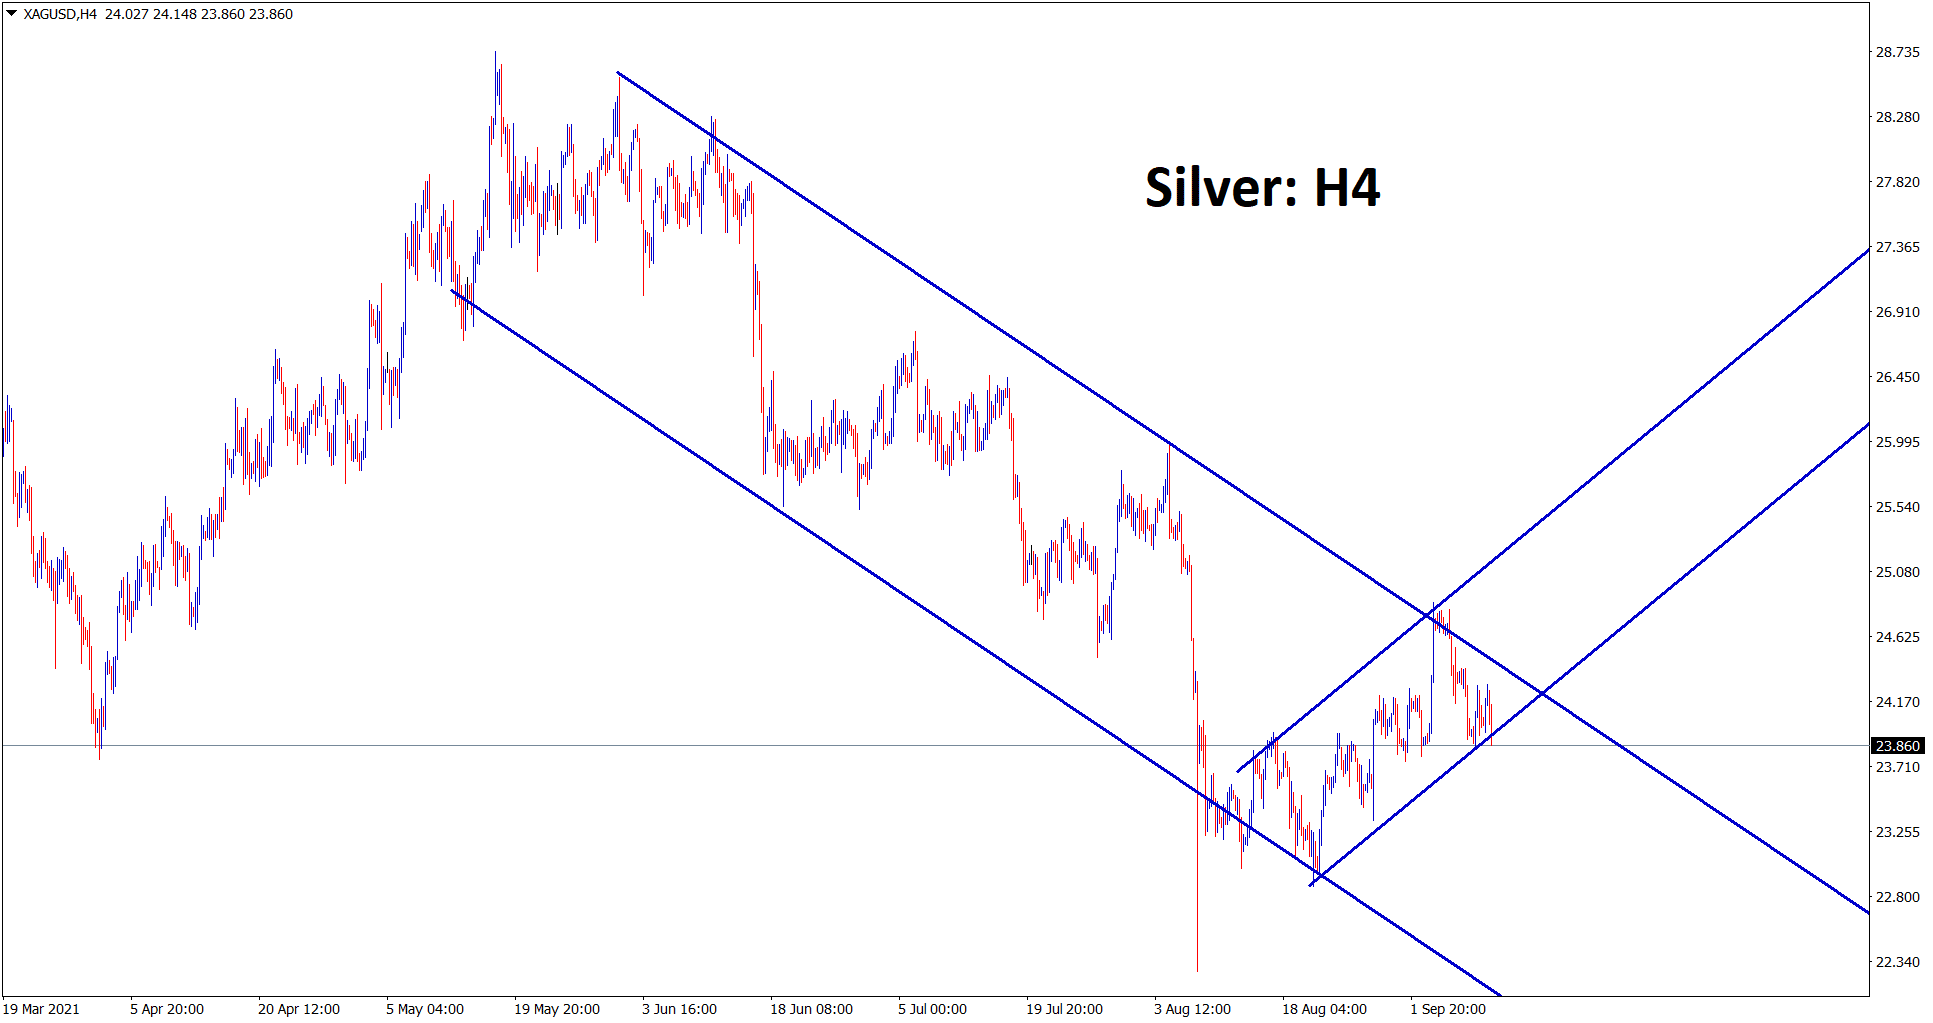 Silver price XAGUUSD is moving between the channel ranges